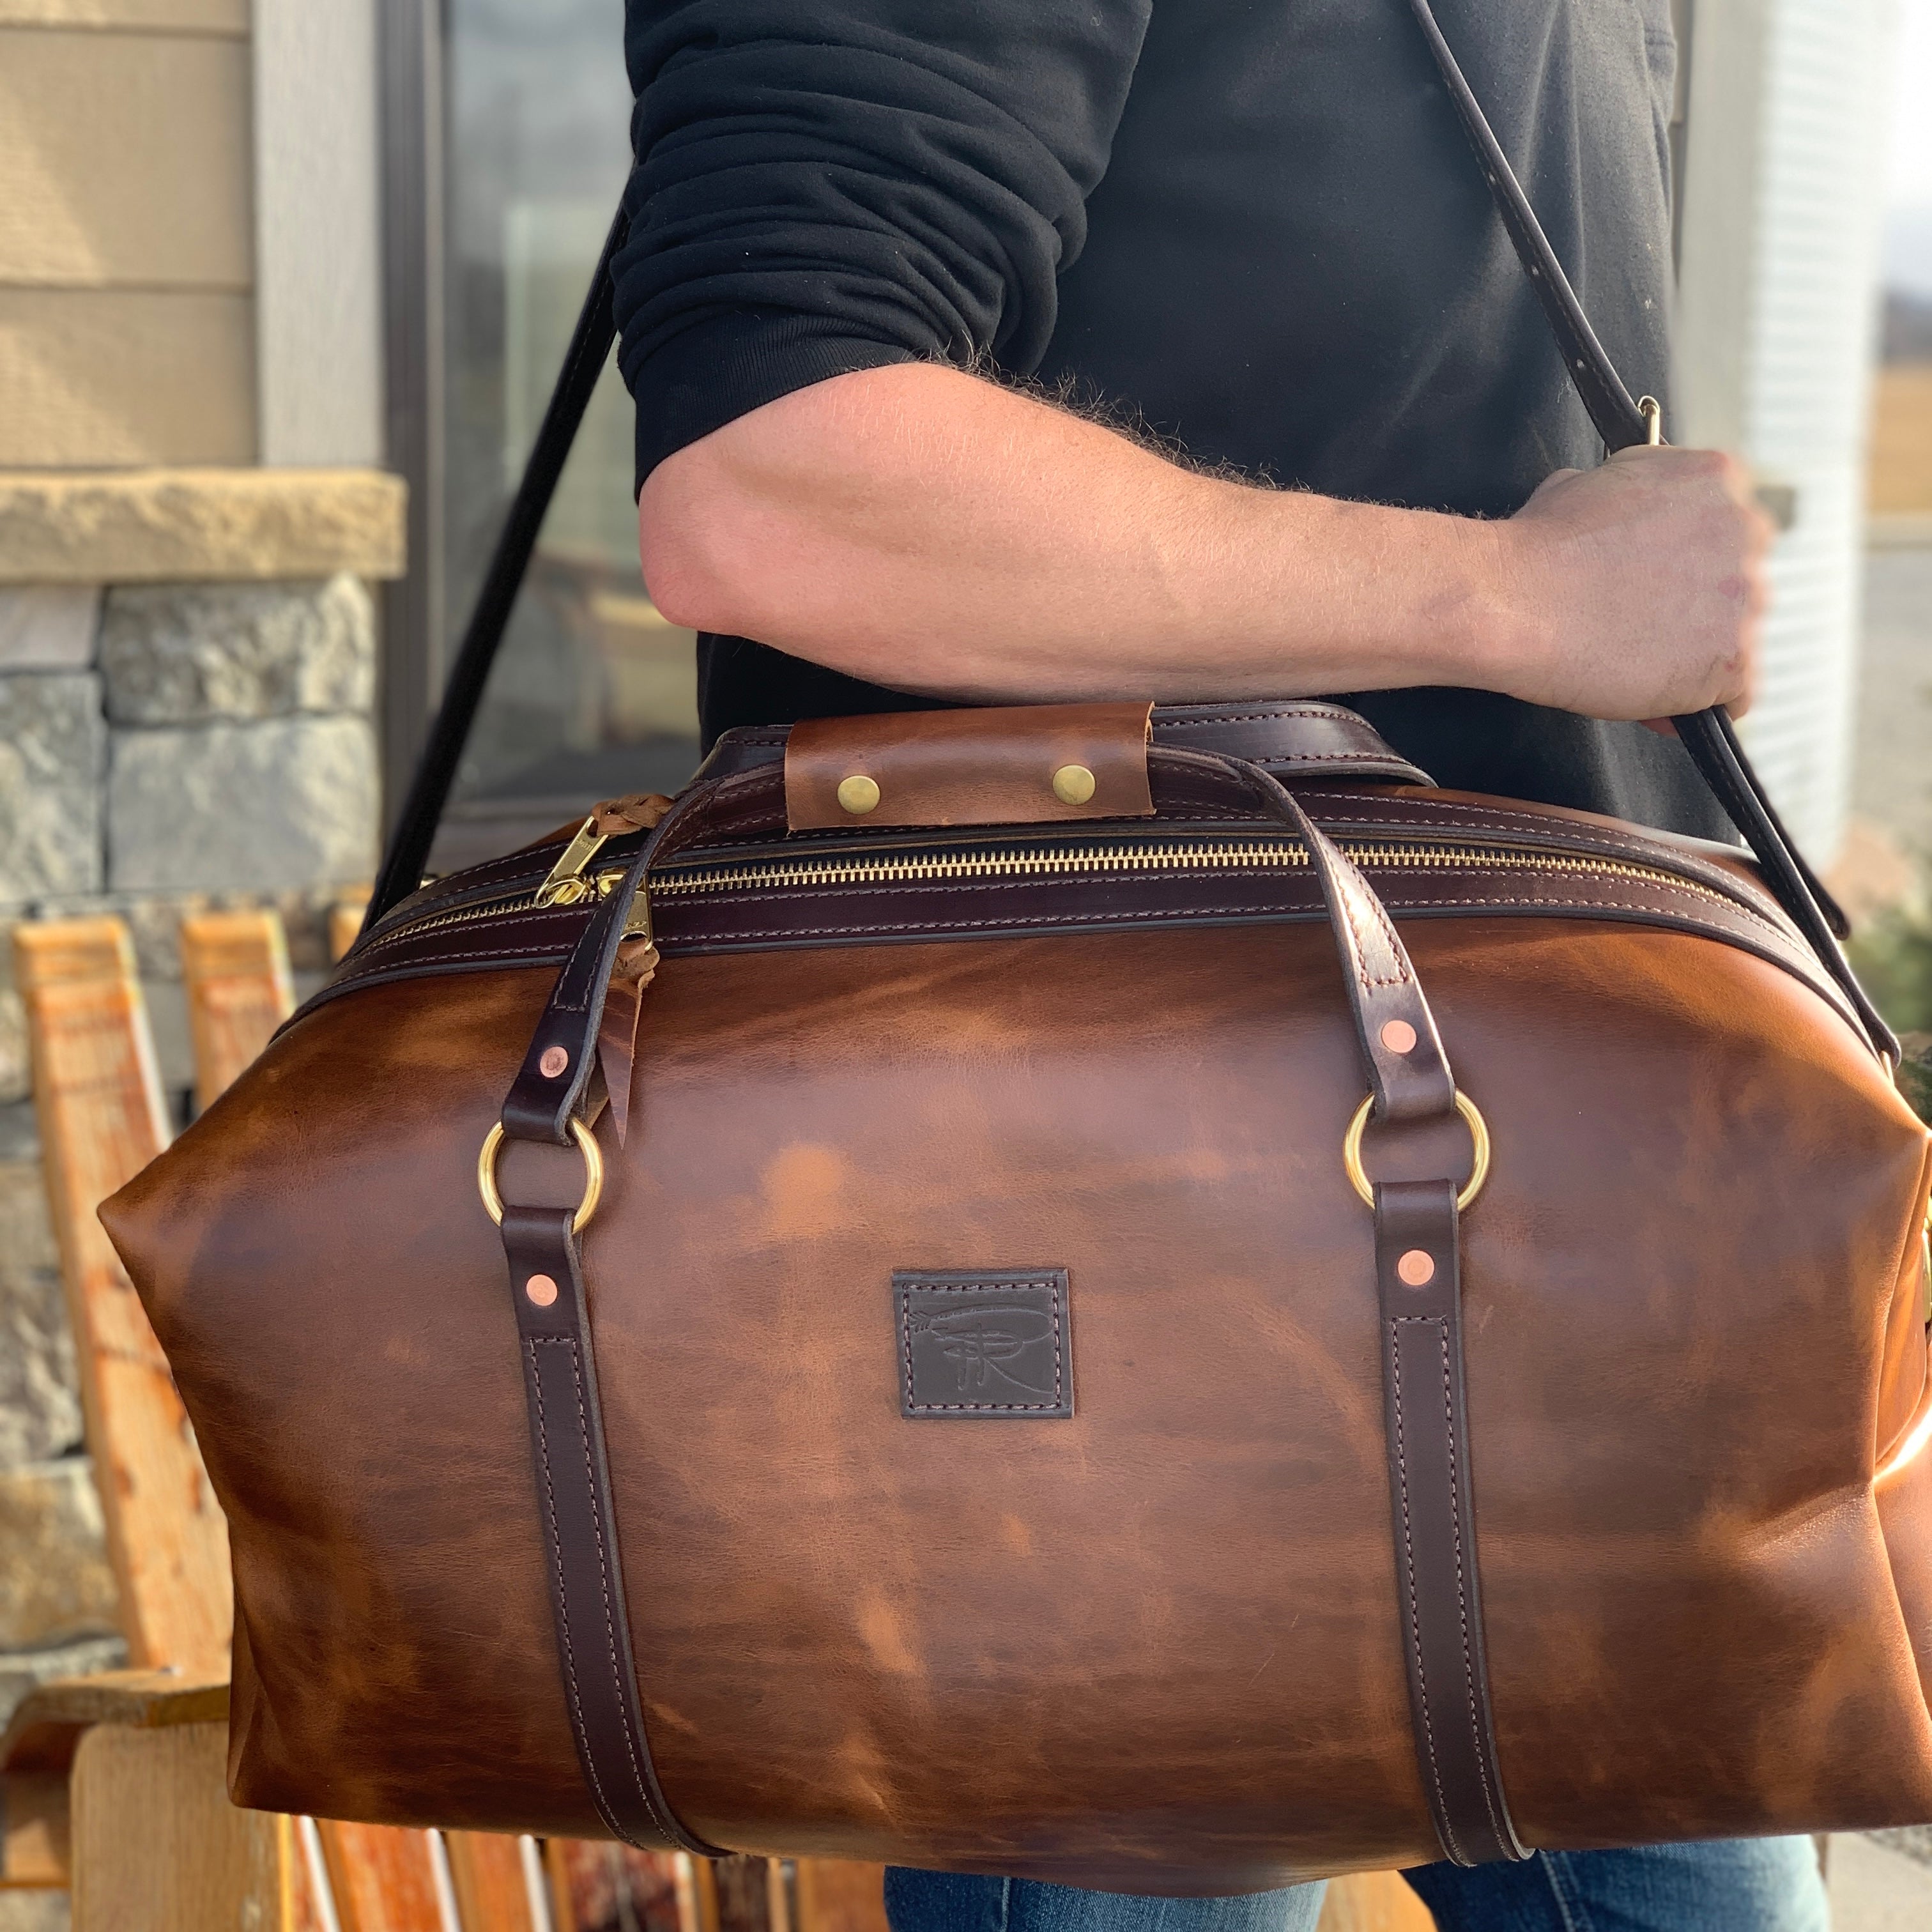 duffel bag travel gear luggage leather shop workshop leather repair coeur d'alene fly fishing mens products retail shop shopping business men local store ranch cowboy western